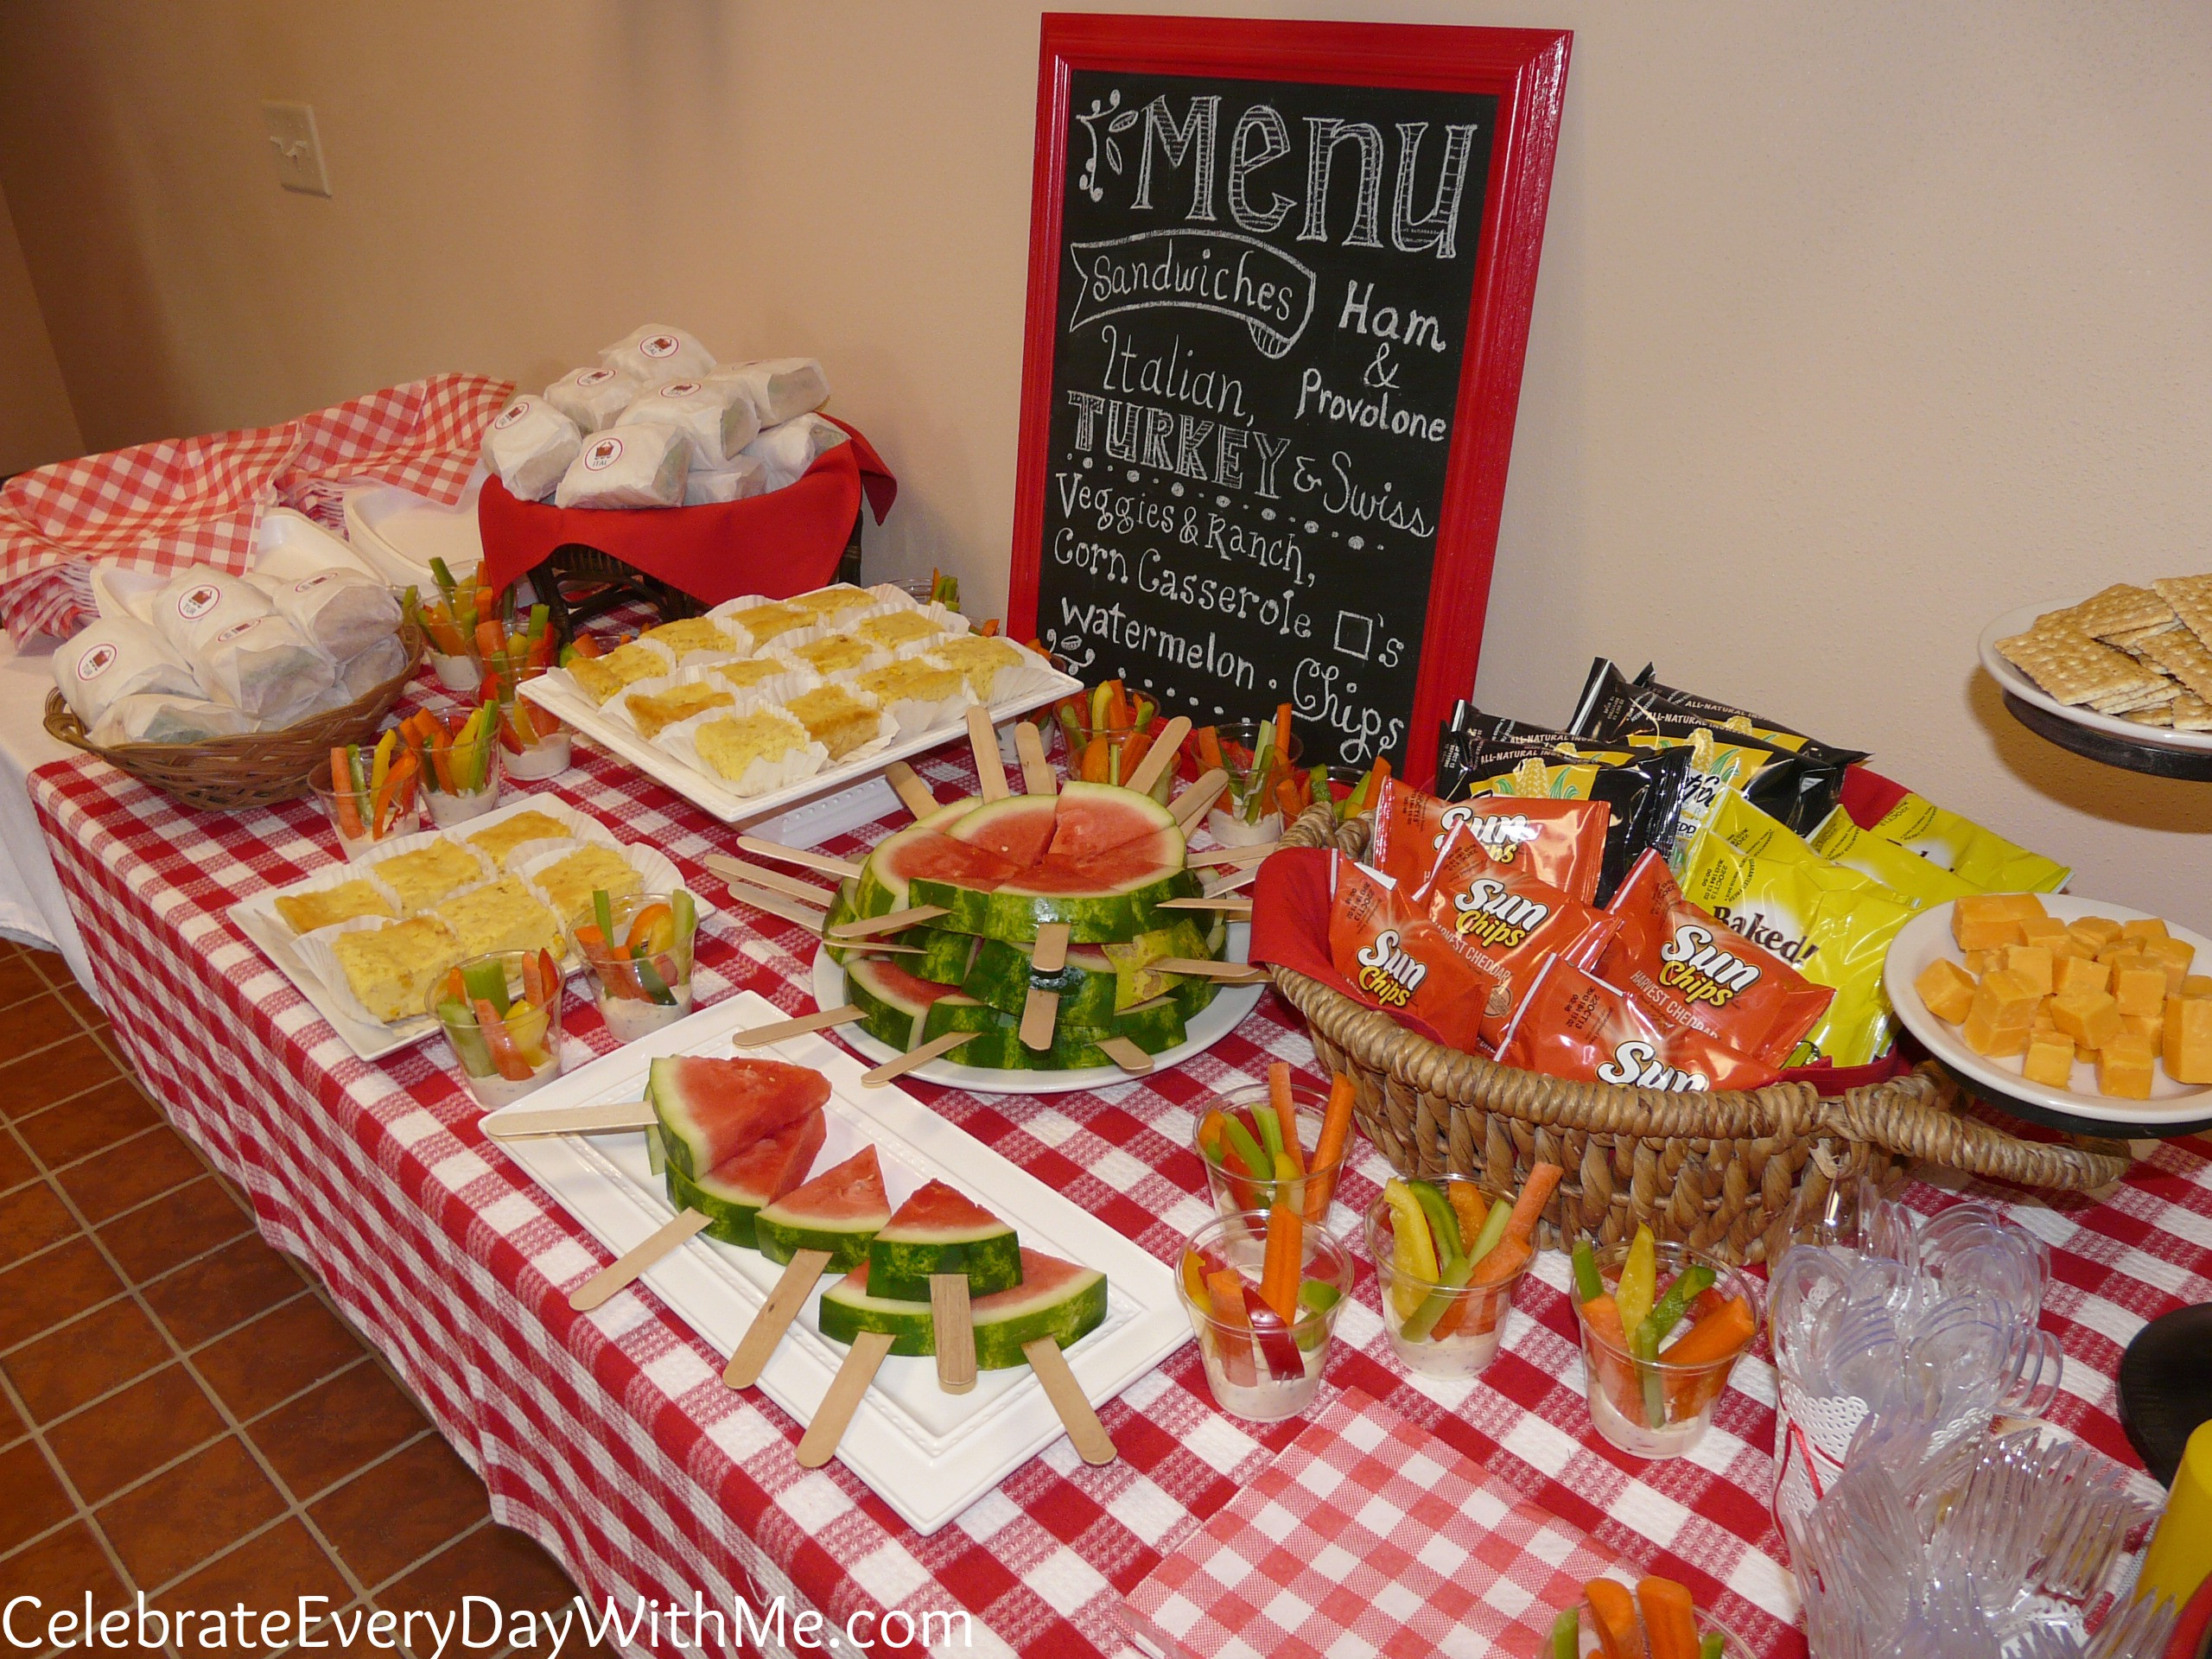 Picnic Birthday Party Food Ideas
 A Picnic Party Celebrate Every Day With Me